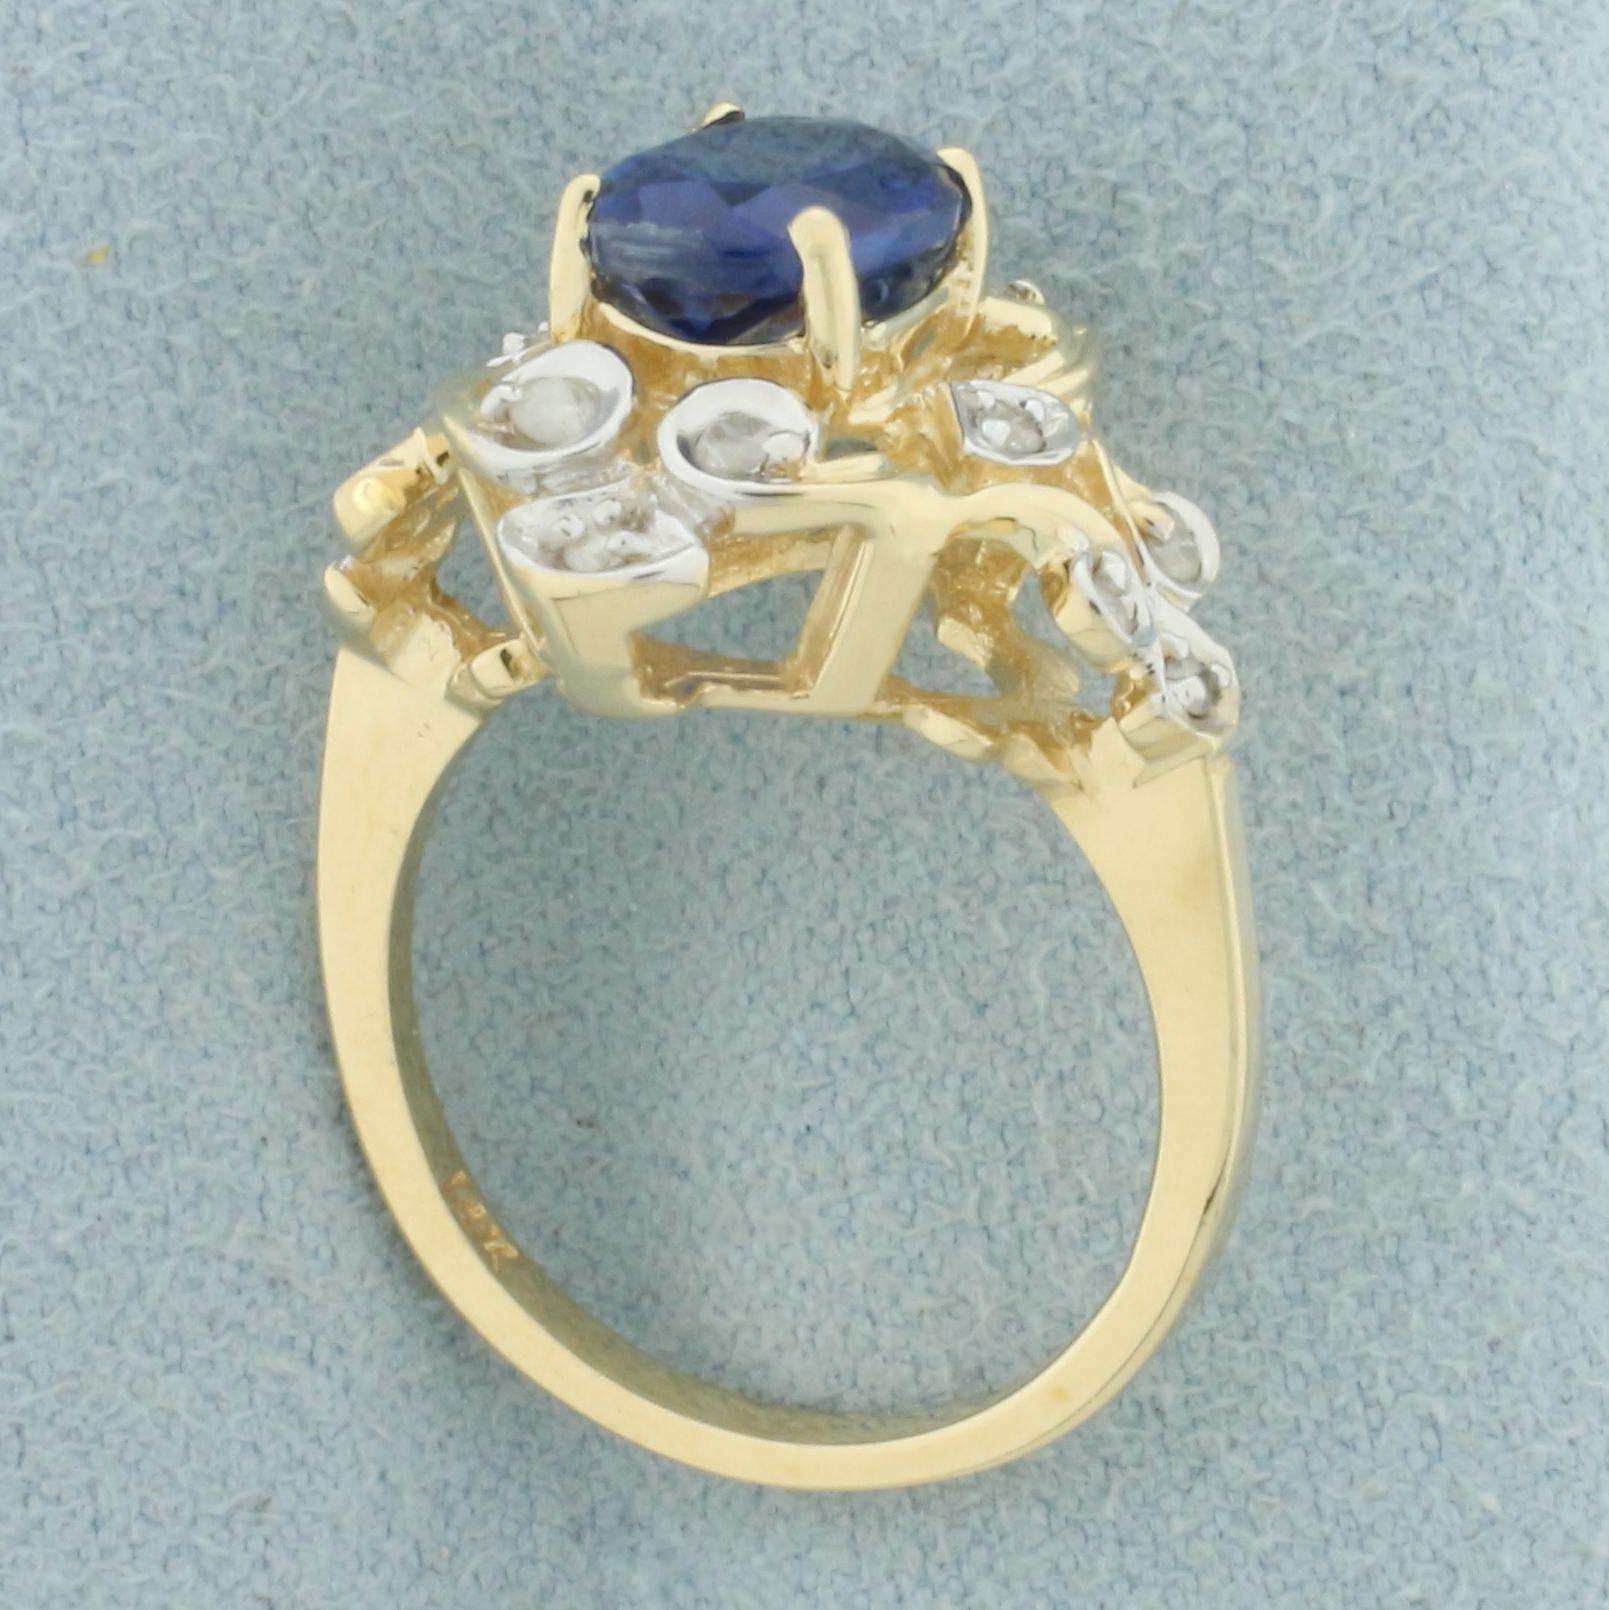 Sapphire And Diamond Scroll Design Ring In 14k Yellow Gold